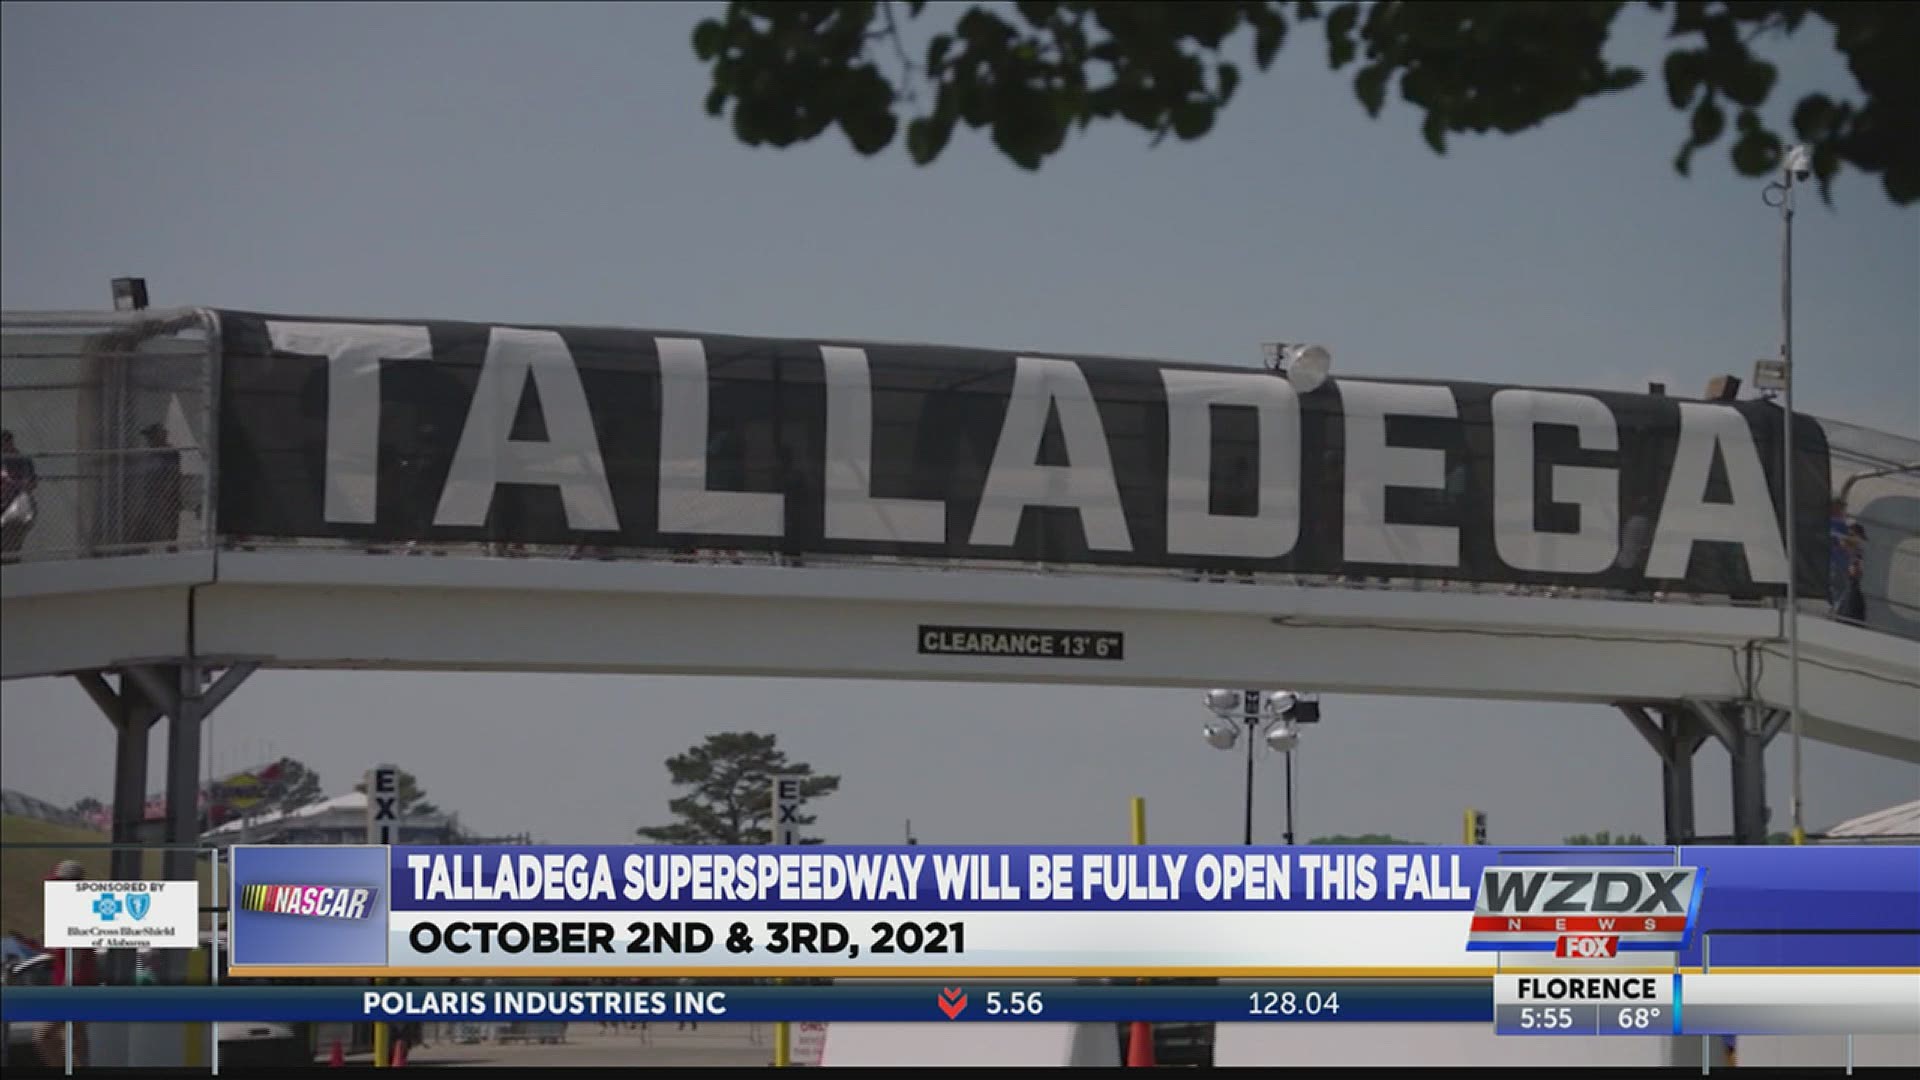 On Oct. 2-3, there will be no restrictions on the number of fans allowed to take in the action at the Talladega Superspeedway.